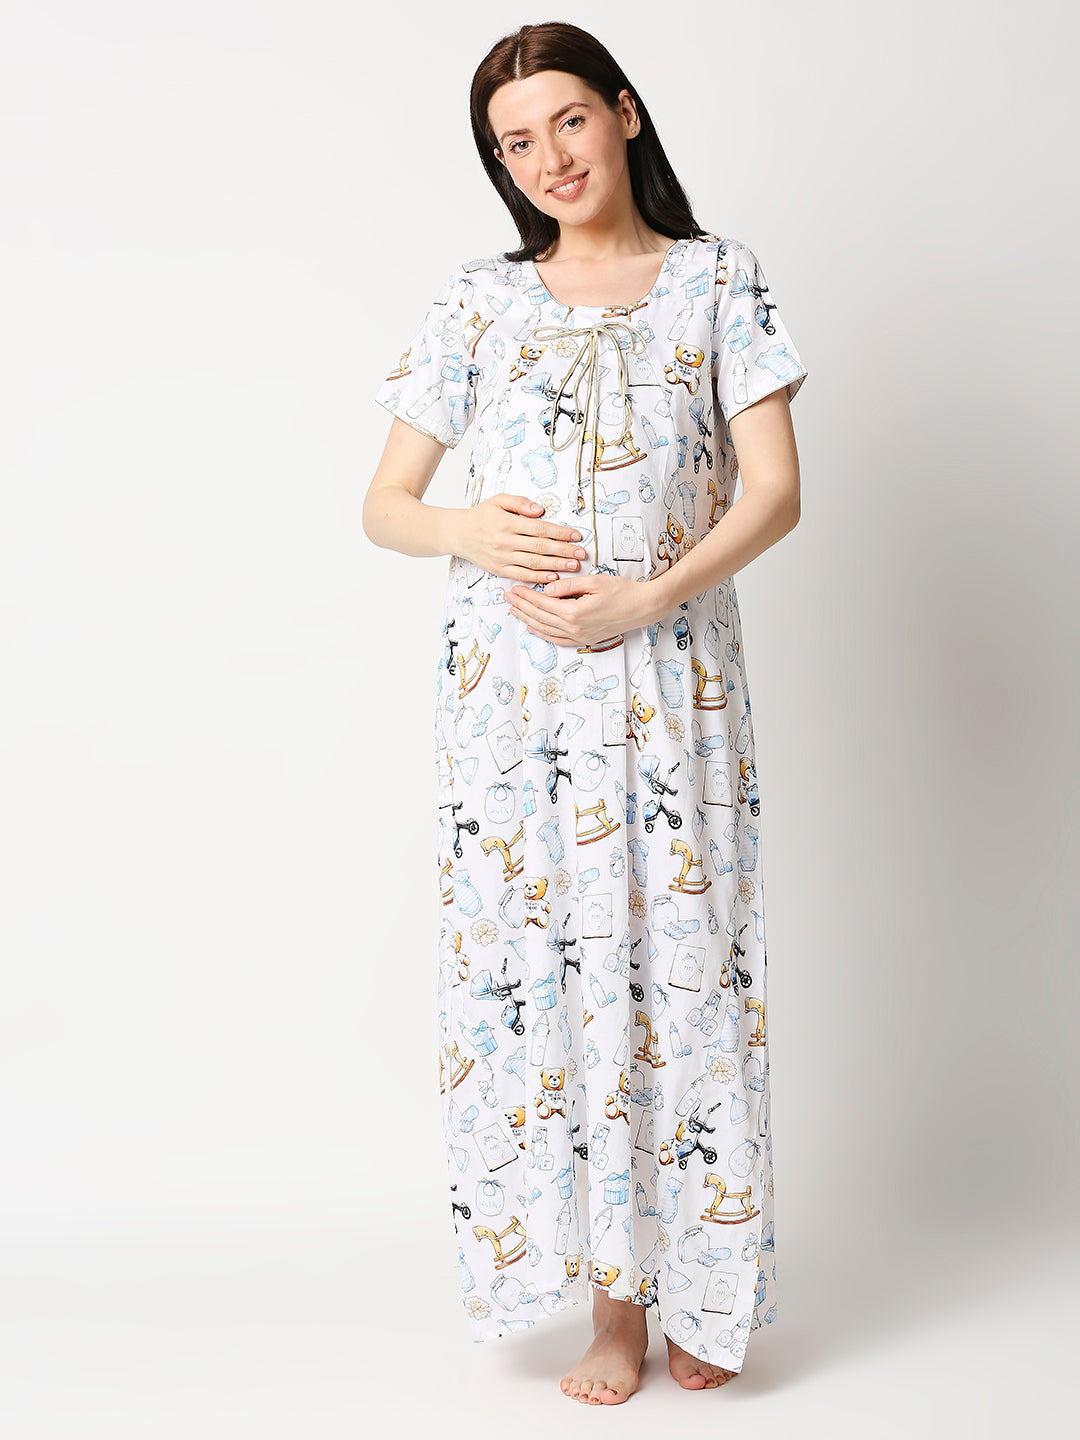 Baby Dior Maternity Gown - Pure Cotton Round Neck Gown with 2 Invisible Zips for Feeding